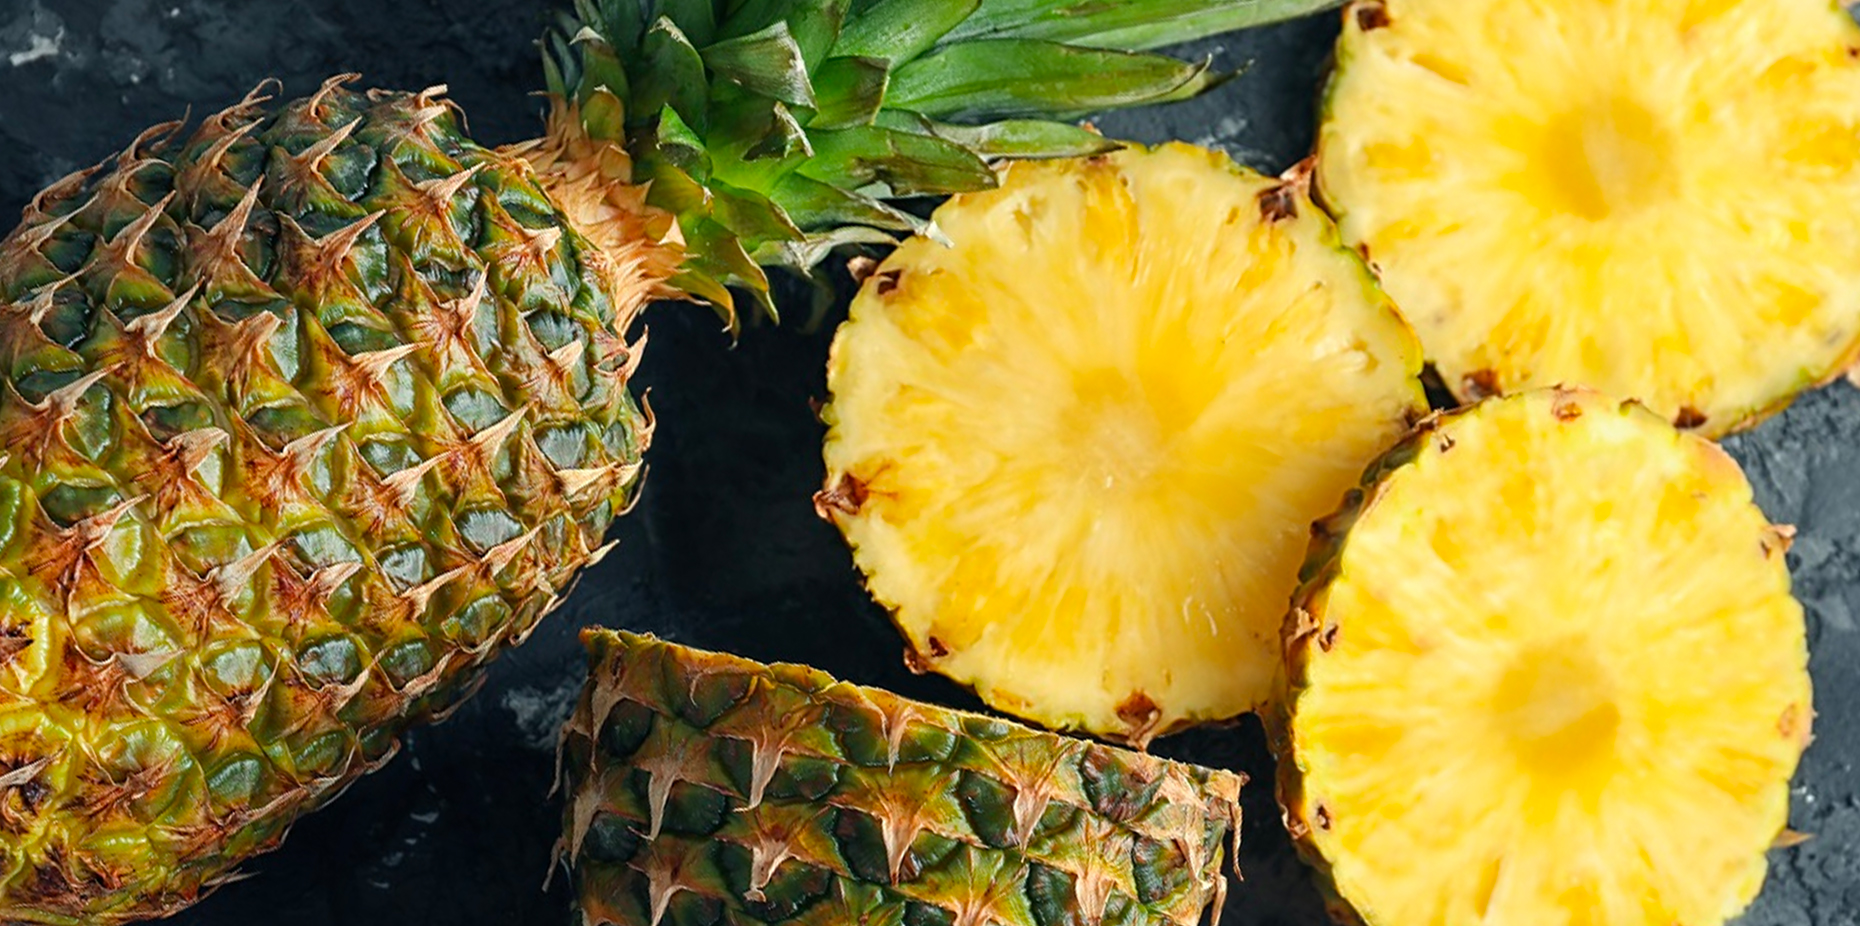 Pineapple: Facts, Nutrition, Benefits & More